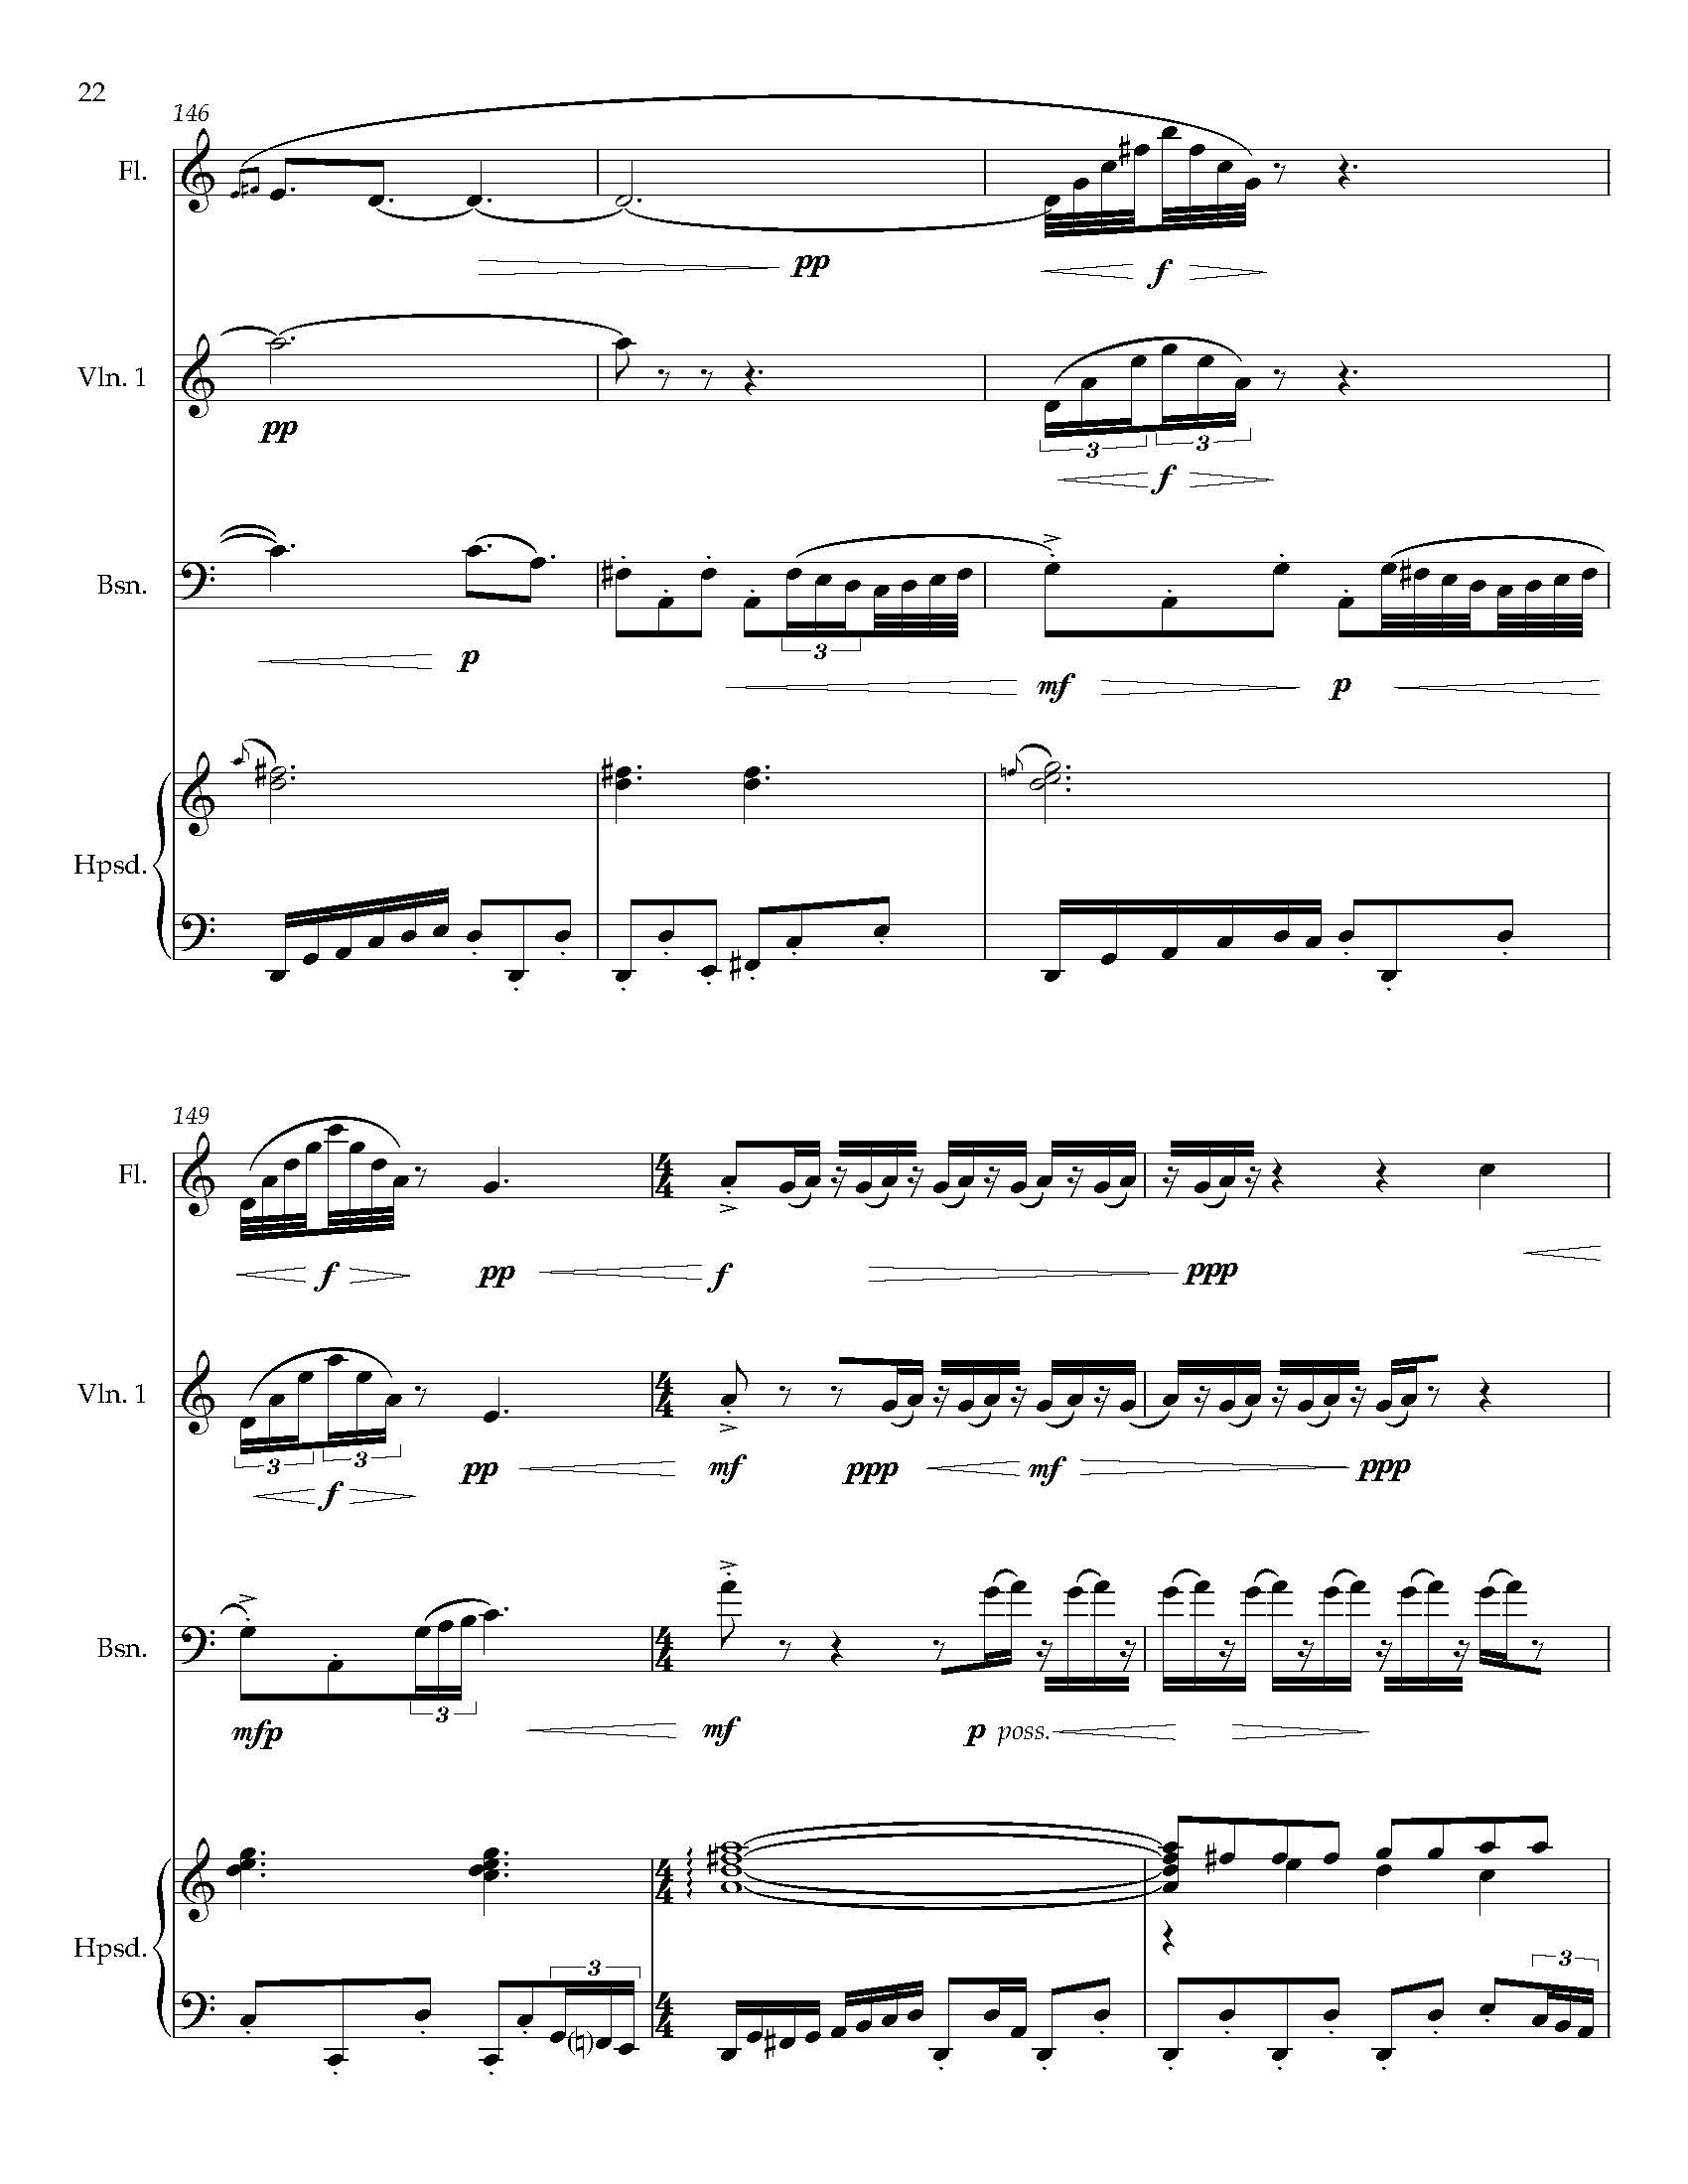 The Hourglass Equation - Complete Score_Page_28.jpg